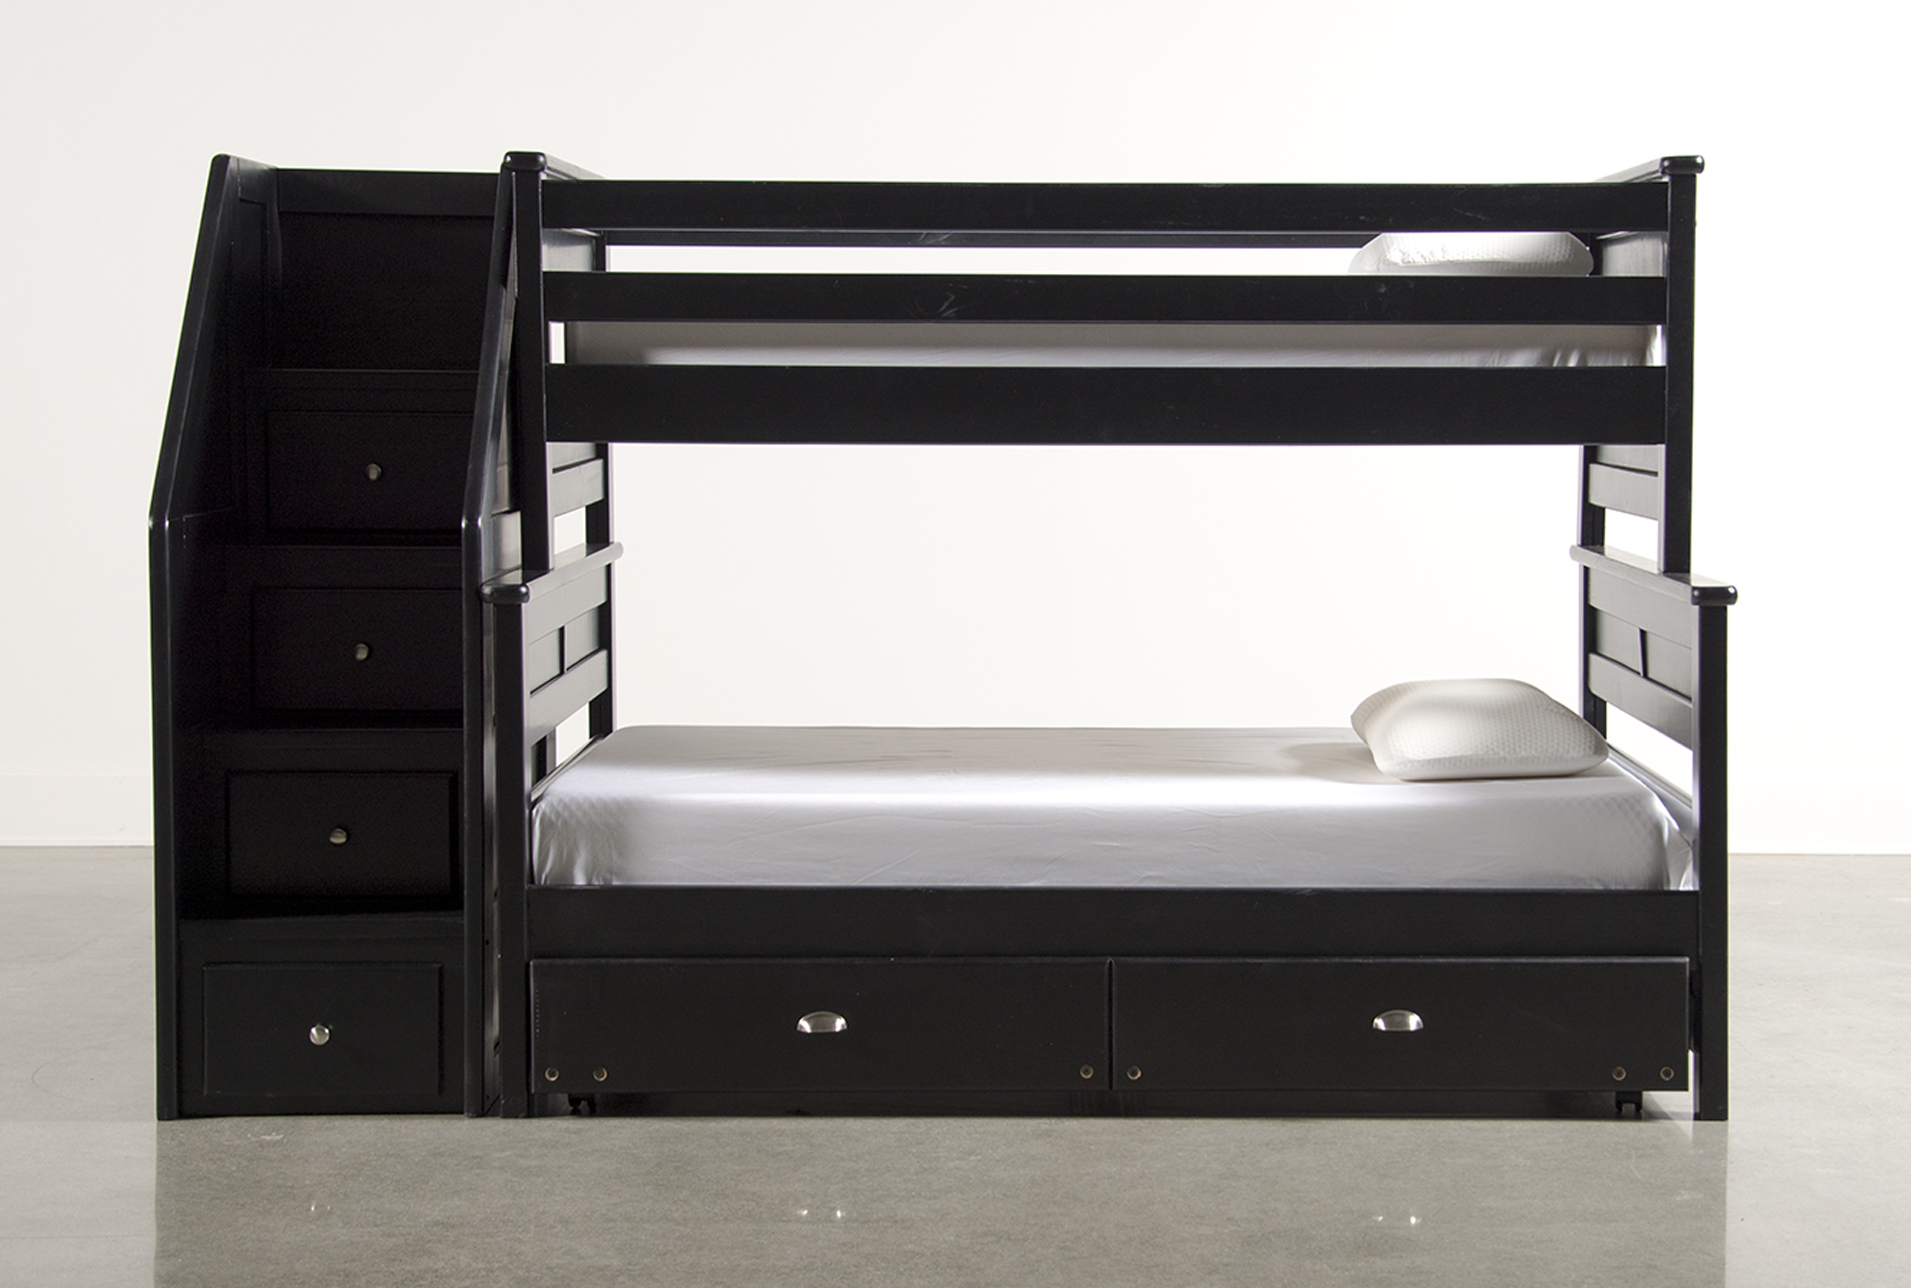 twin over twin bunk bed with trundle and stairs